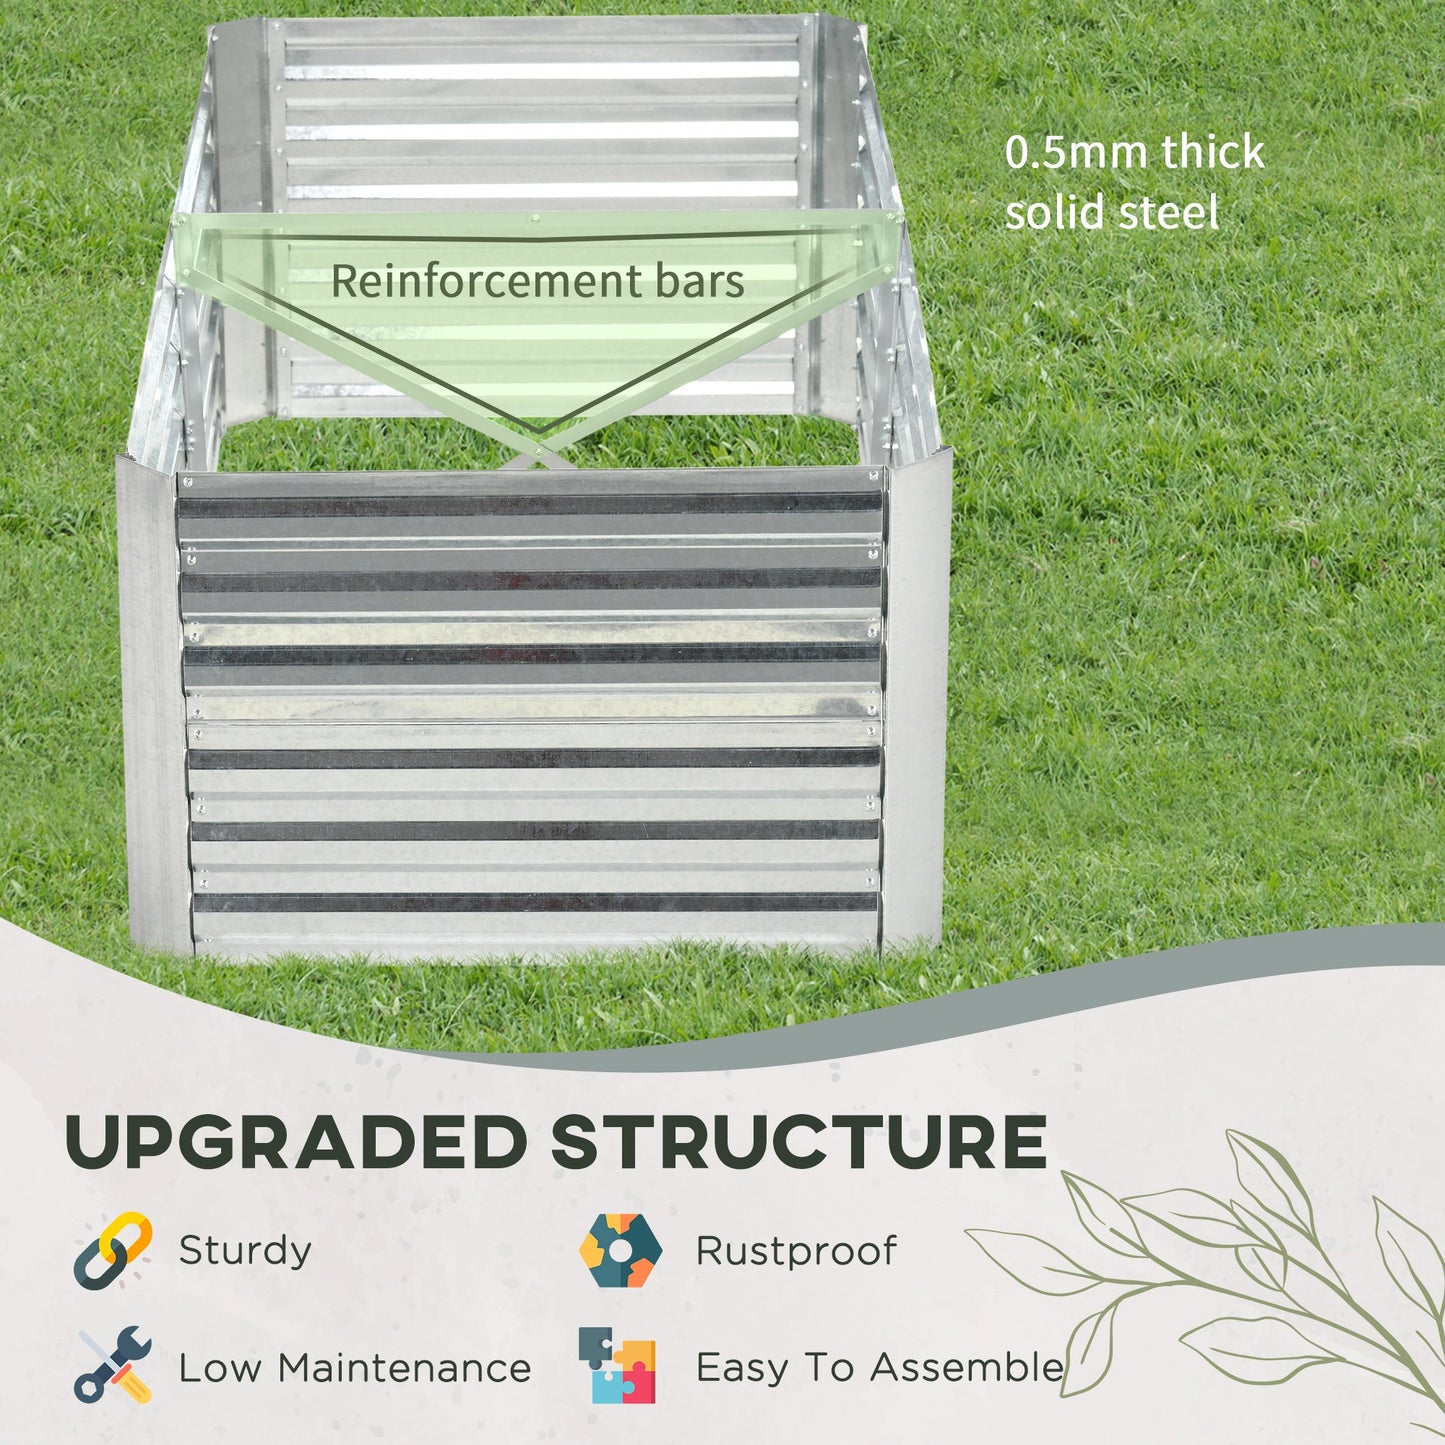 Galvanized Raised Garden Bed, Steel Outdoor Planters with Reinforced Rods, 71'' x 35'' x 23'', Silver - Gallery Canada